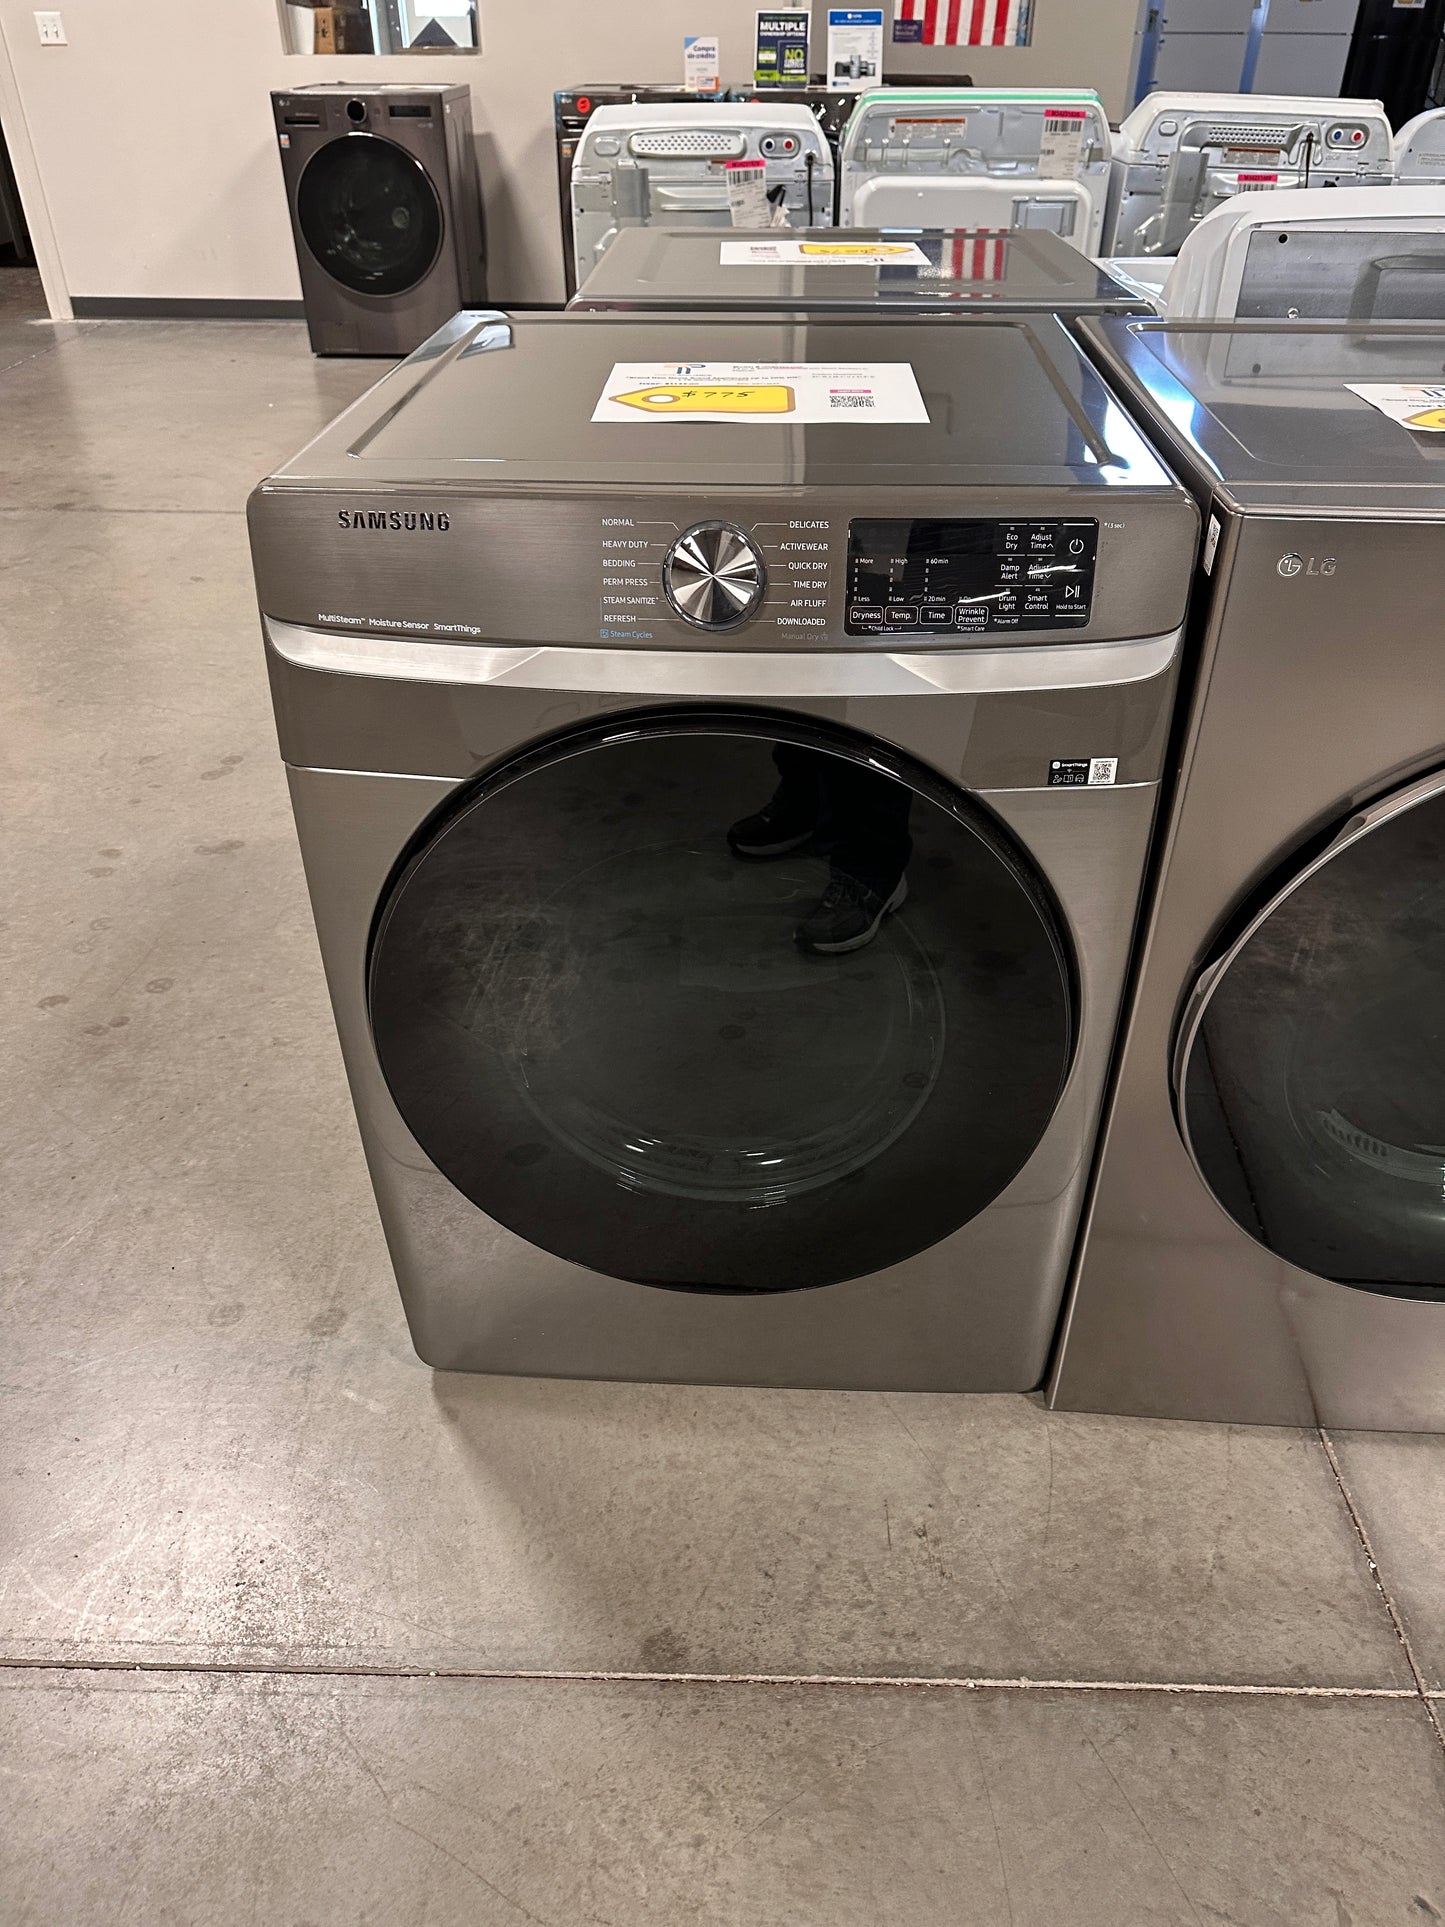 GREAT NEW SAMSUNG STACKABLE SMART ELECTRIC DRYER MODEL: DVE45B6300P DRY12646